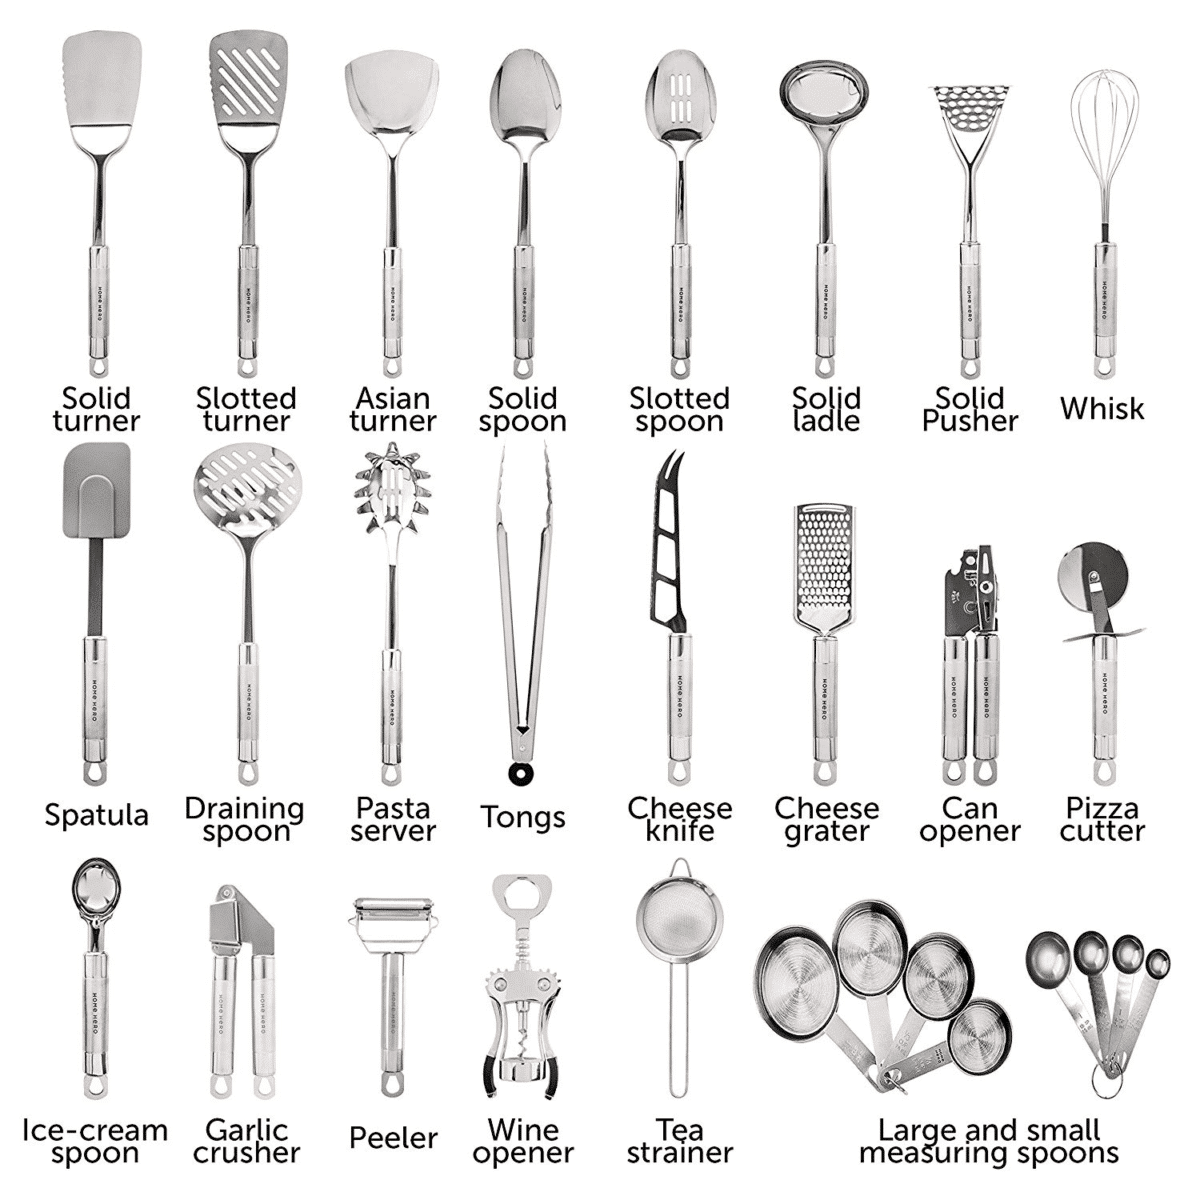 Large assortment of real kitchen tools, sized for children